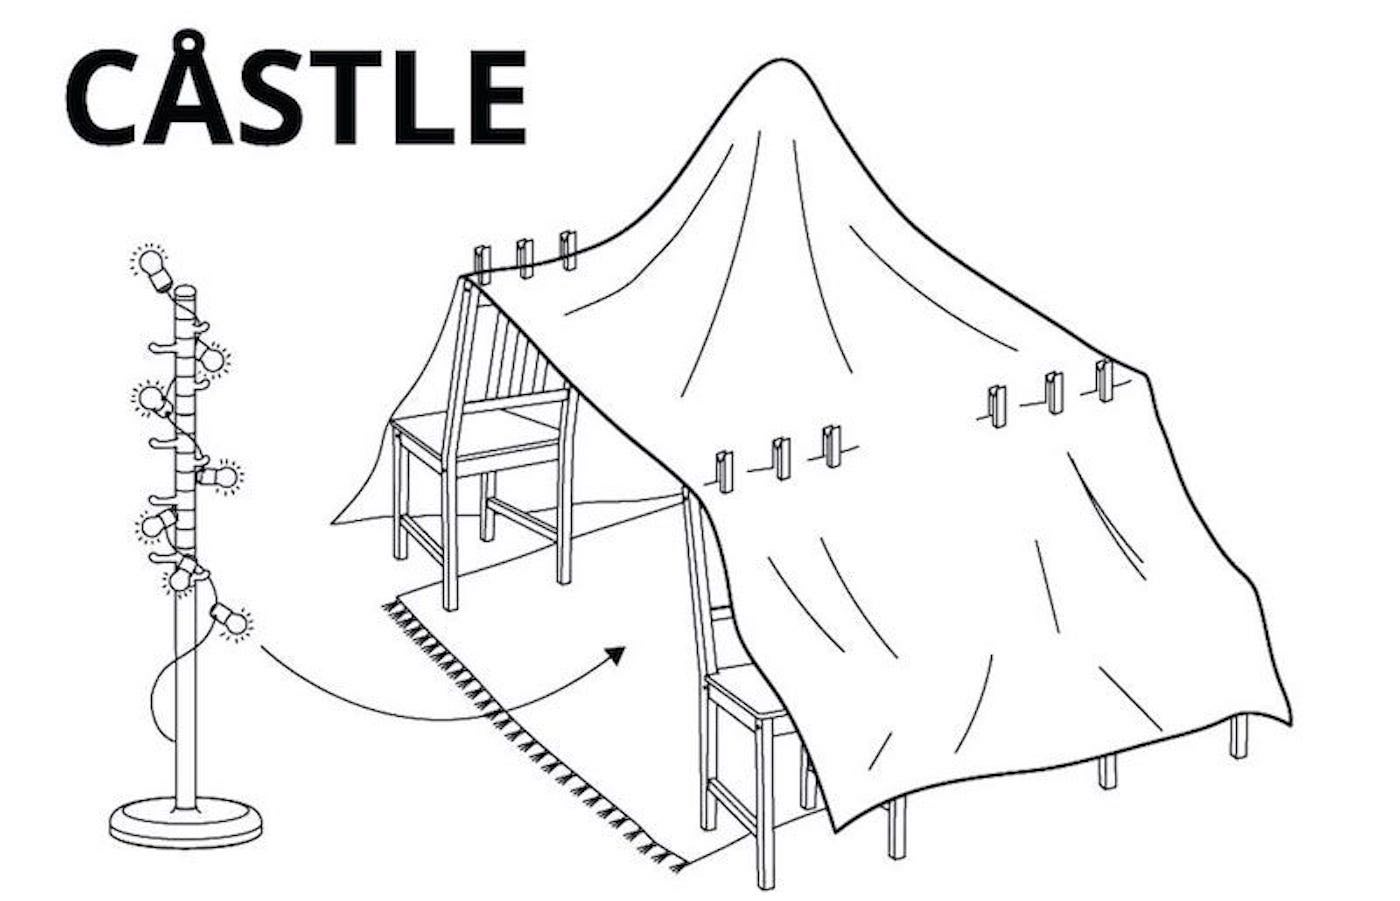 Ikea releases instructions on how to build homemade forts for kids